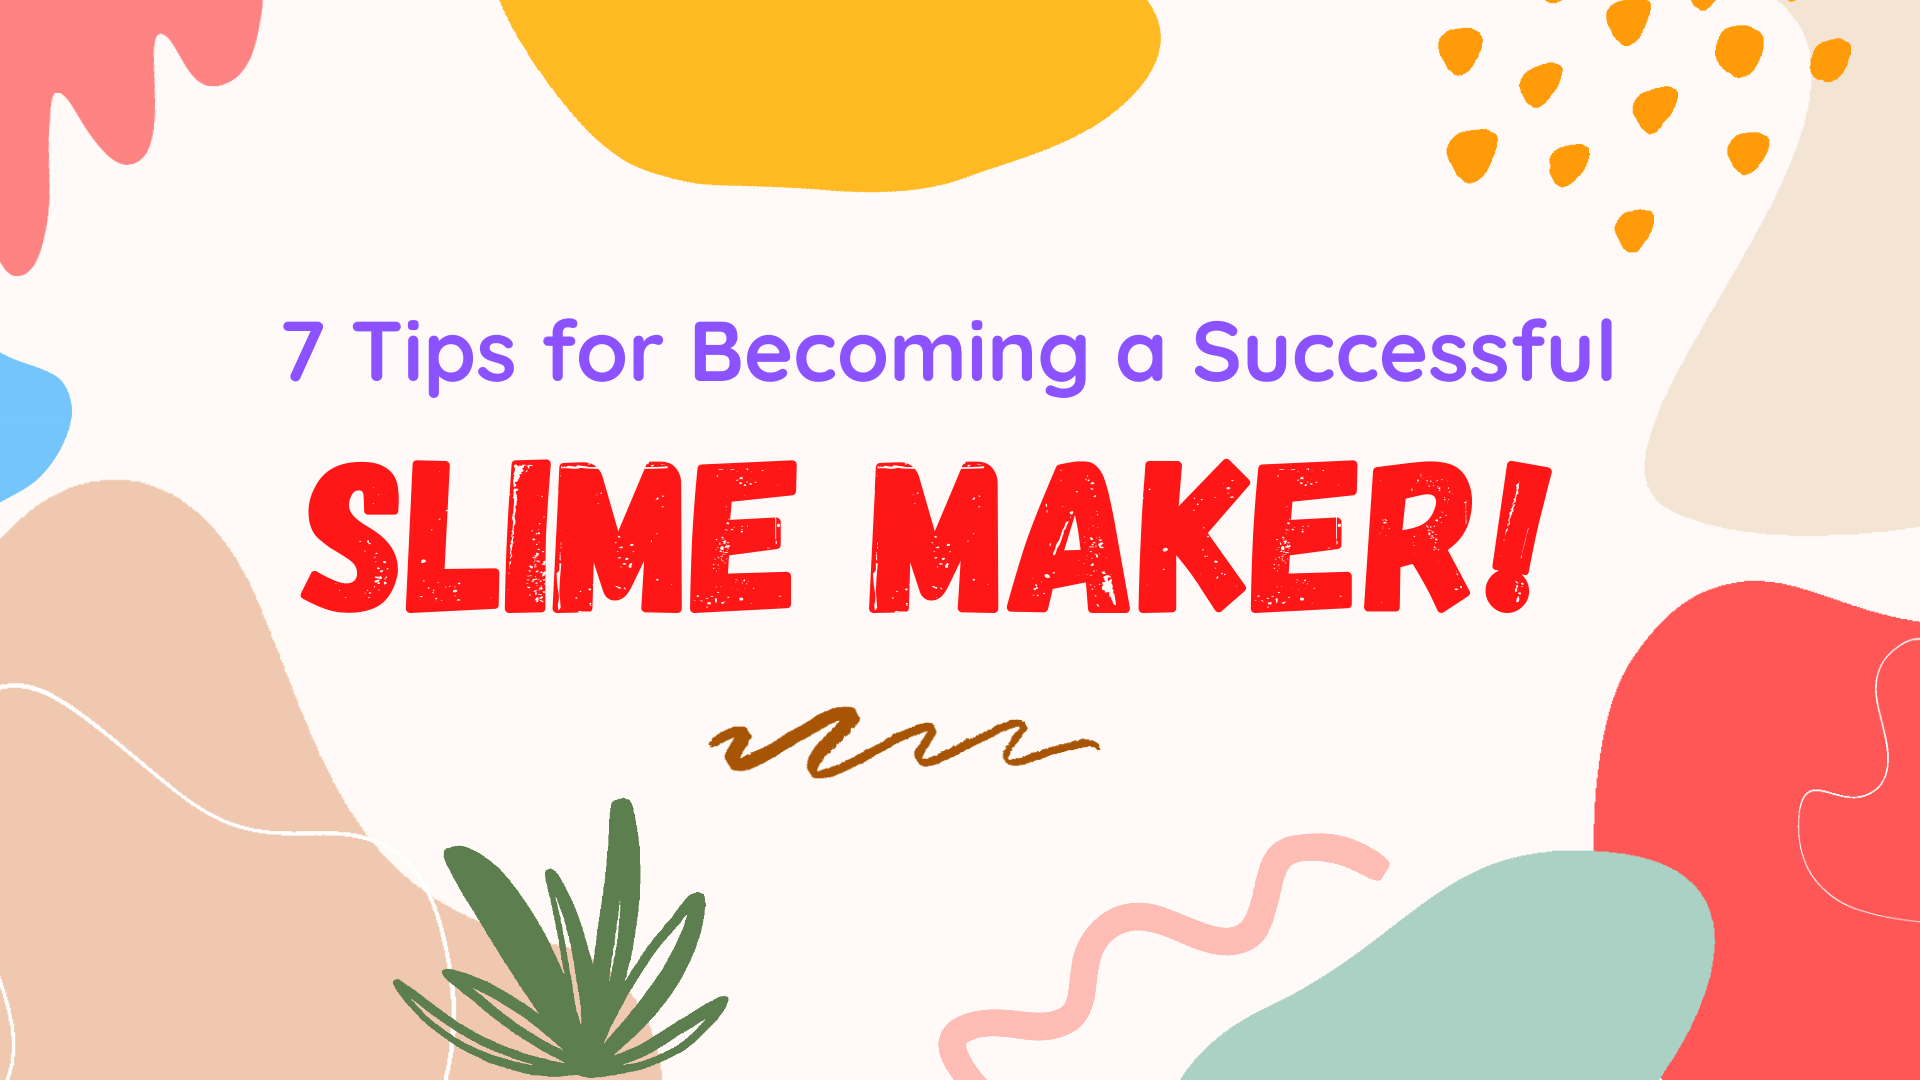 Slime Business : 7 Tips for Becoming a Successful Slime Maker